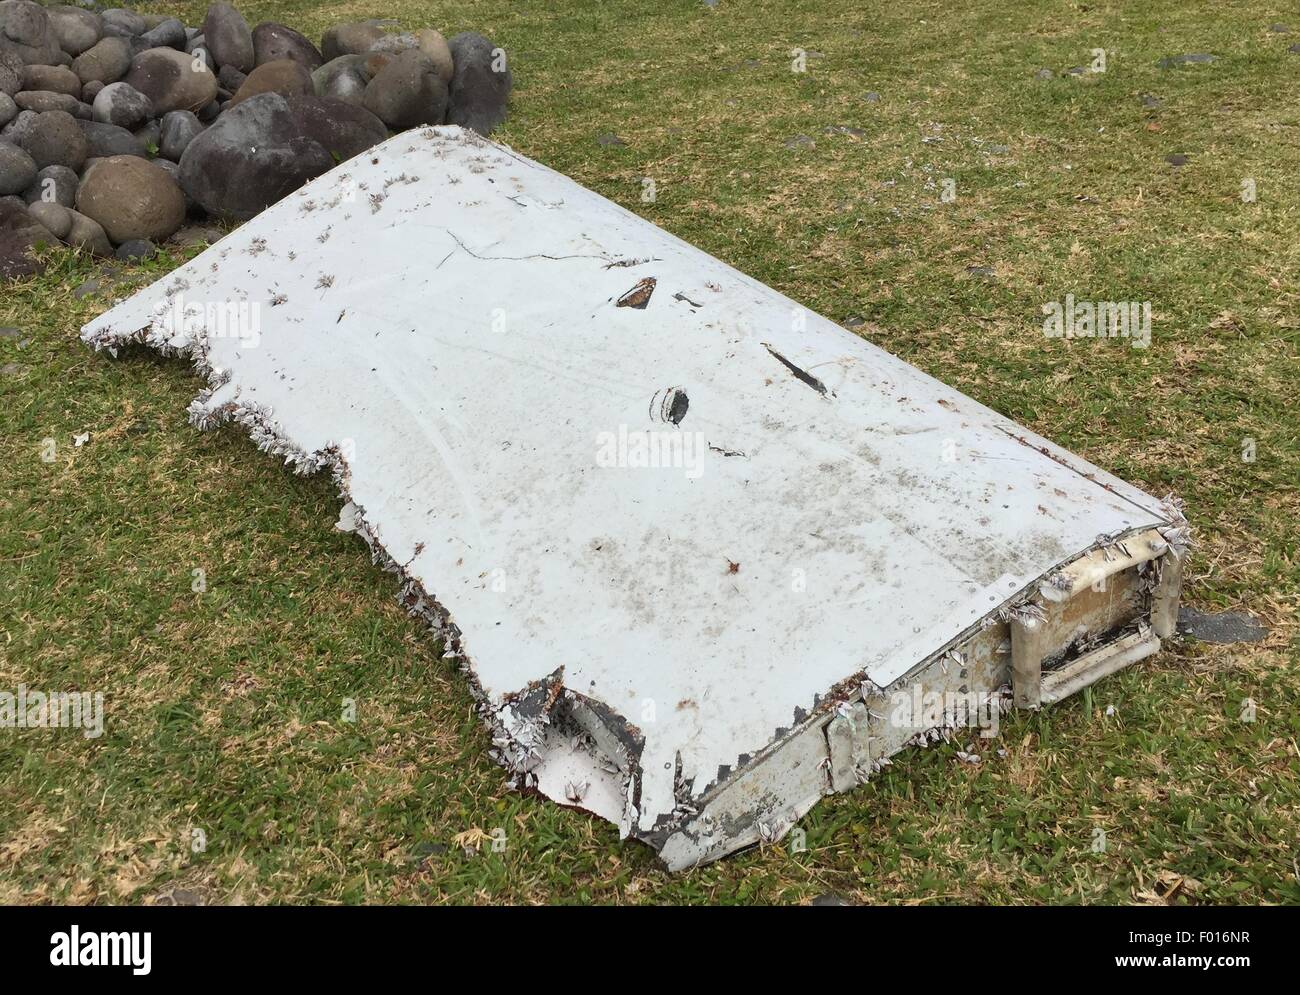 The Reunion Island. 29th July, 2015. Photo taken on Jul.29, 2015, shows a piece of debris on Reunion Island. Verification had confirmed that the debris discovered on Reunion Island belongs to missing Malaysian Airlines flight MH370, Malaysian Prime Minister Najib Razak announced early Thursday. © Romain Latournerie/Xinhua/Alamy Live News Stock Photo